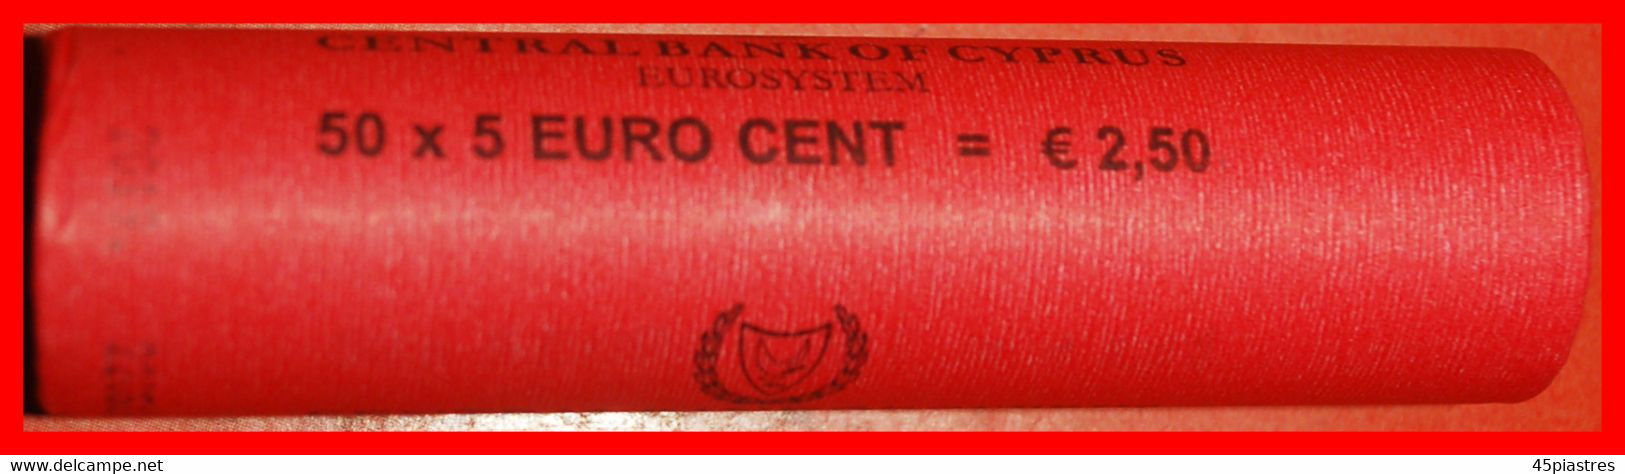 * GREECE: CYPRUS ★ 5 CENTS 2019 UNC ROLL! MOUFLONS! NEW MODIFICATION!  LOW START ★ NO RESERVE! - Rotolini